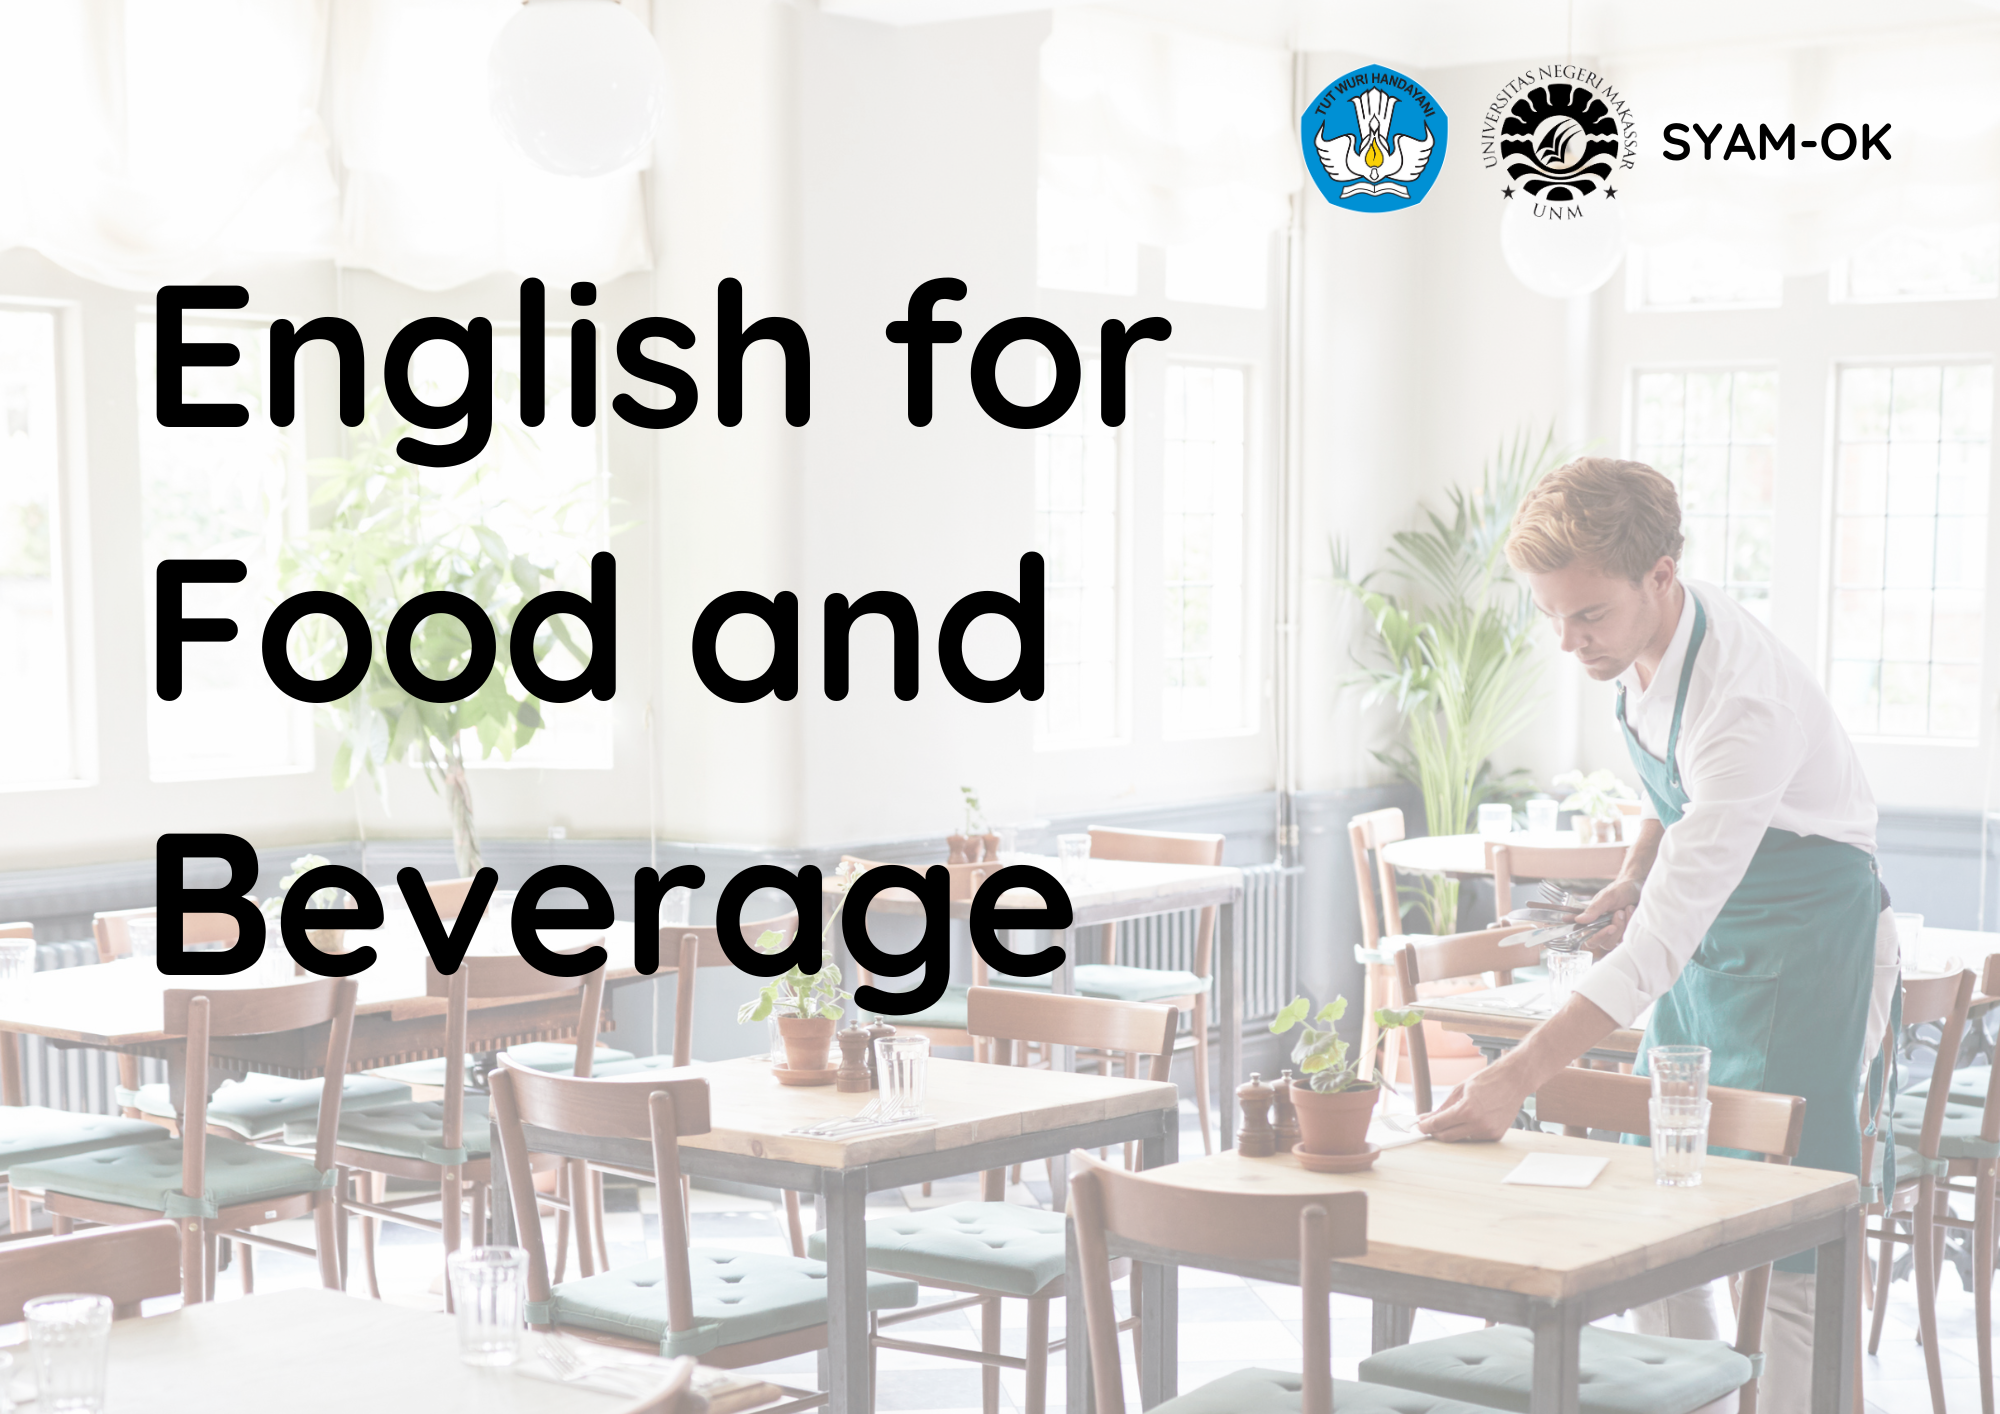 English for Food and Beverage